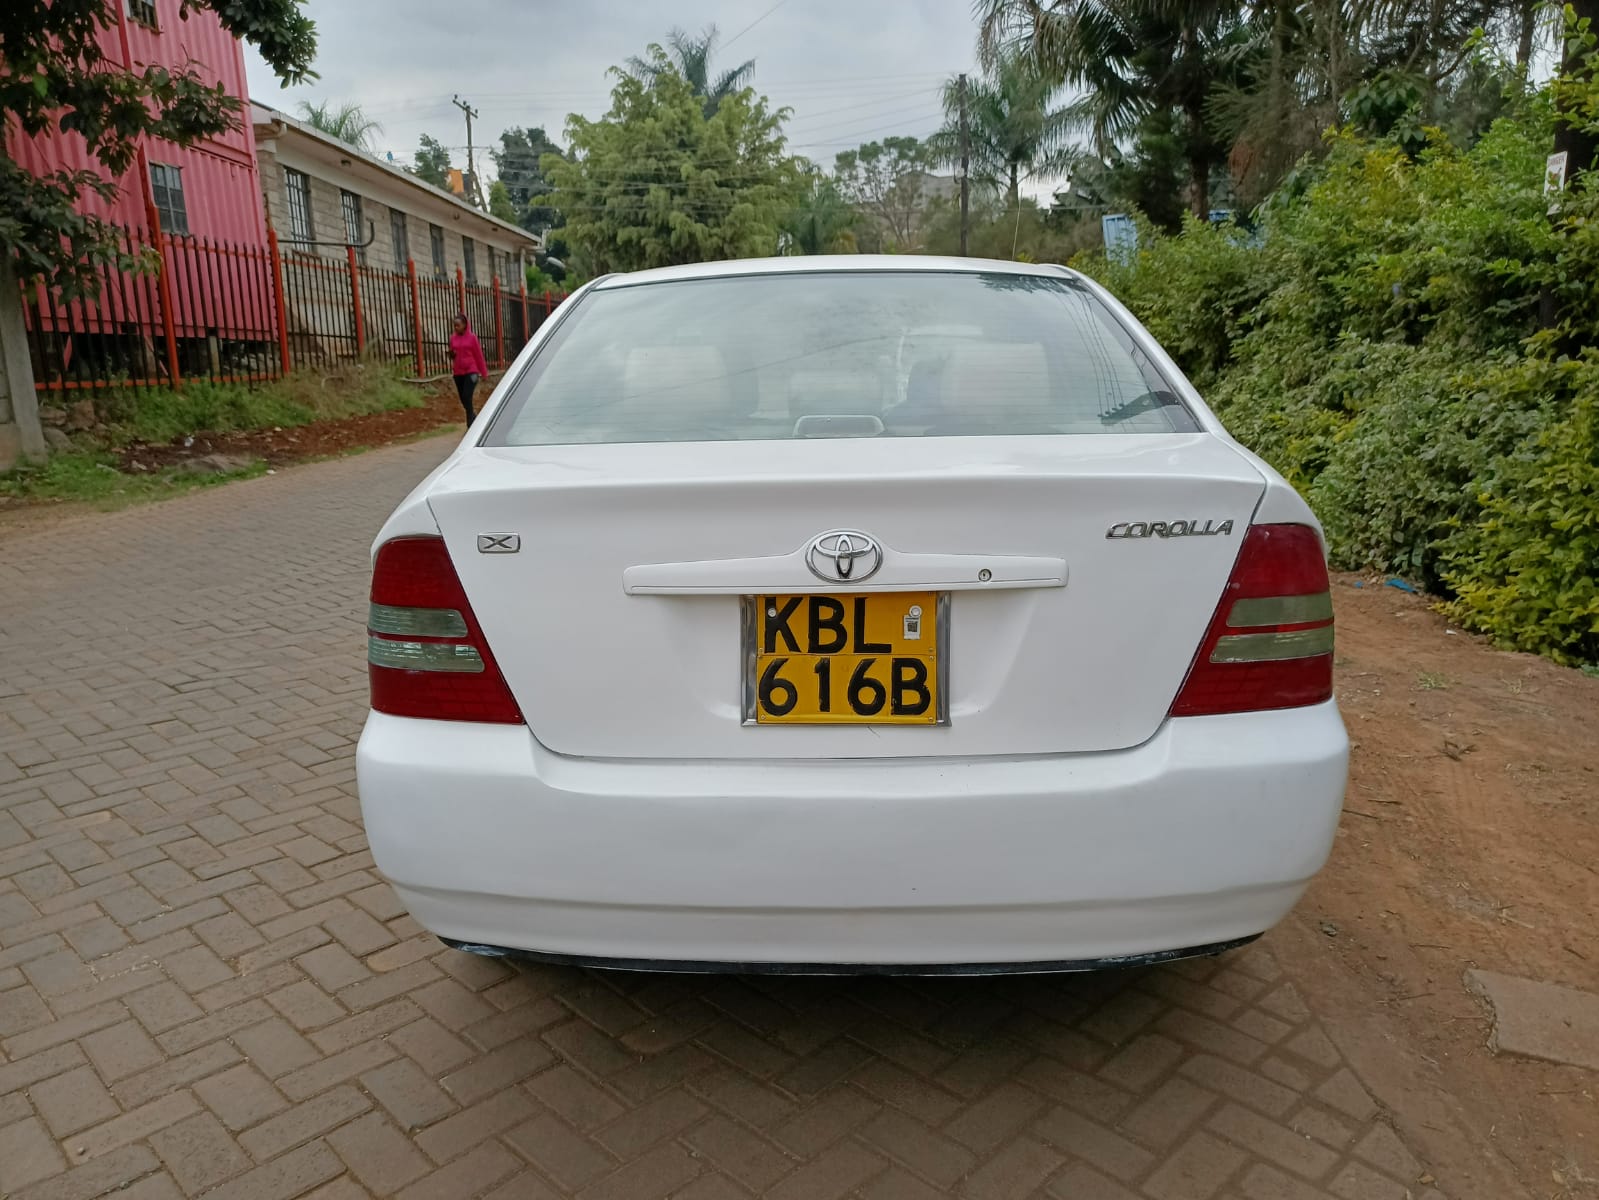 Toyota Corolla NZE 2003 Pay 20% deposit Hottest offer